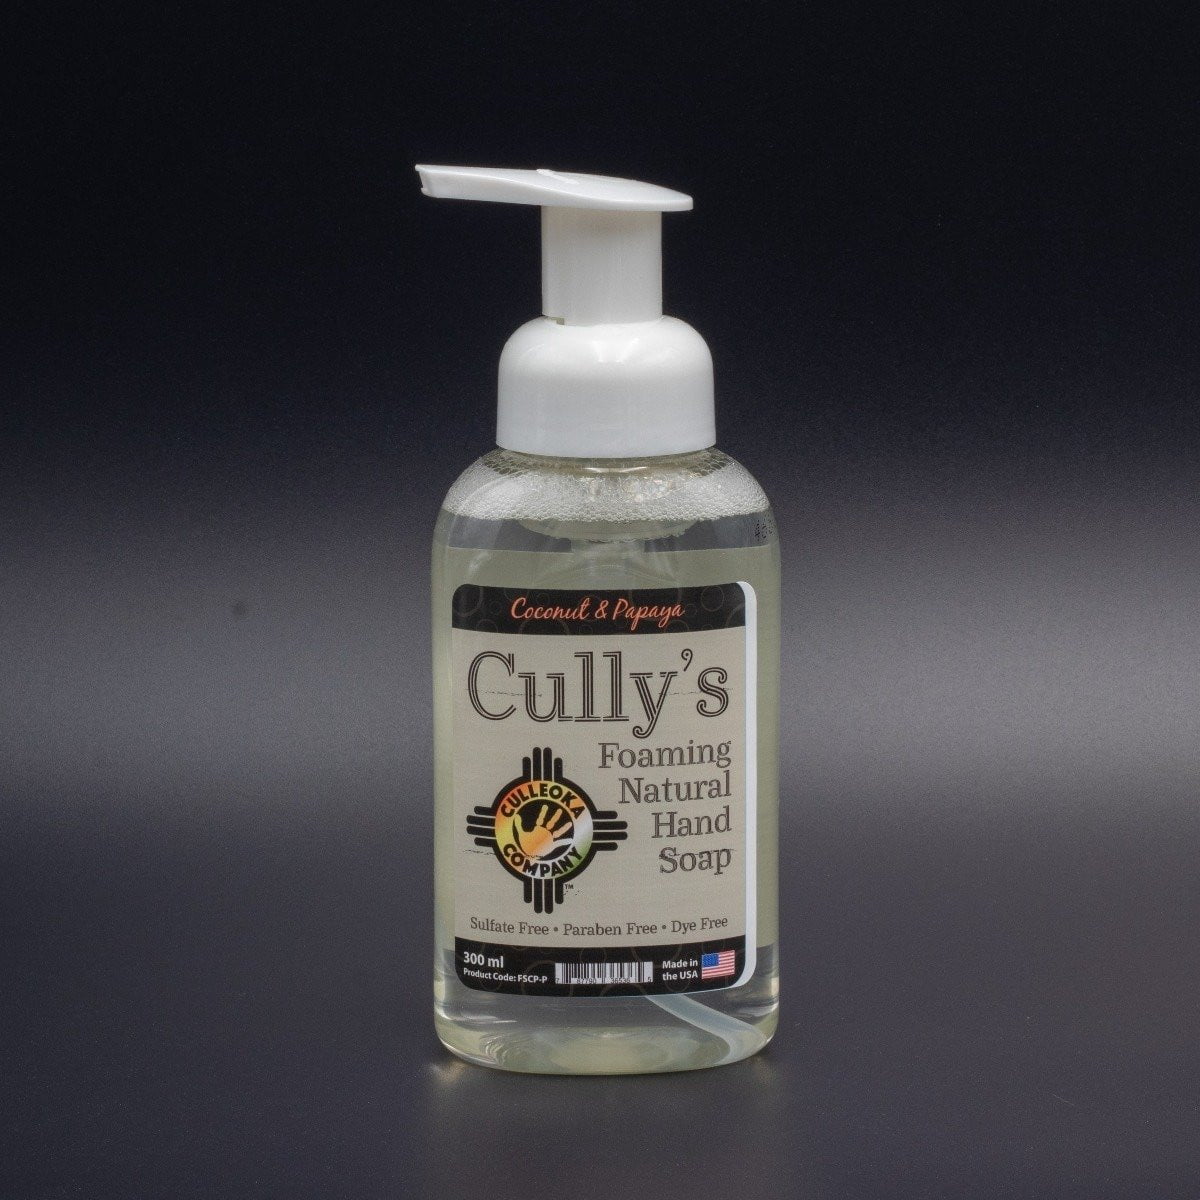 Cully's Natural Foaming Hand Soap